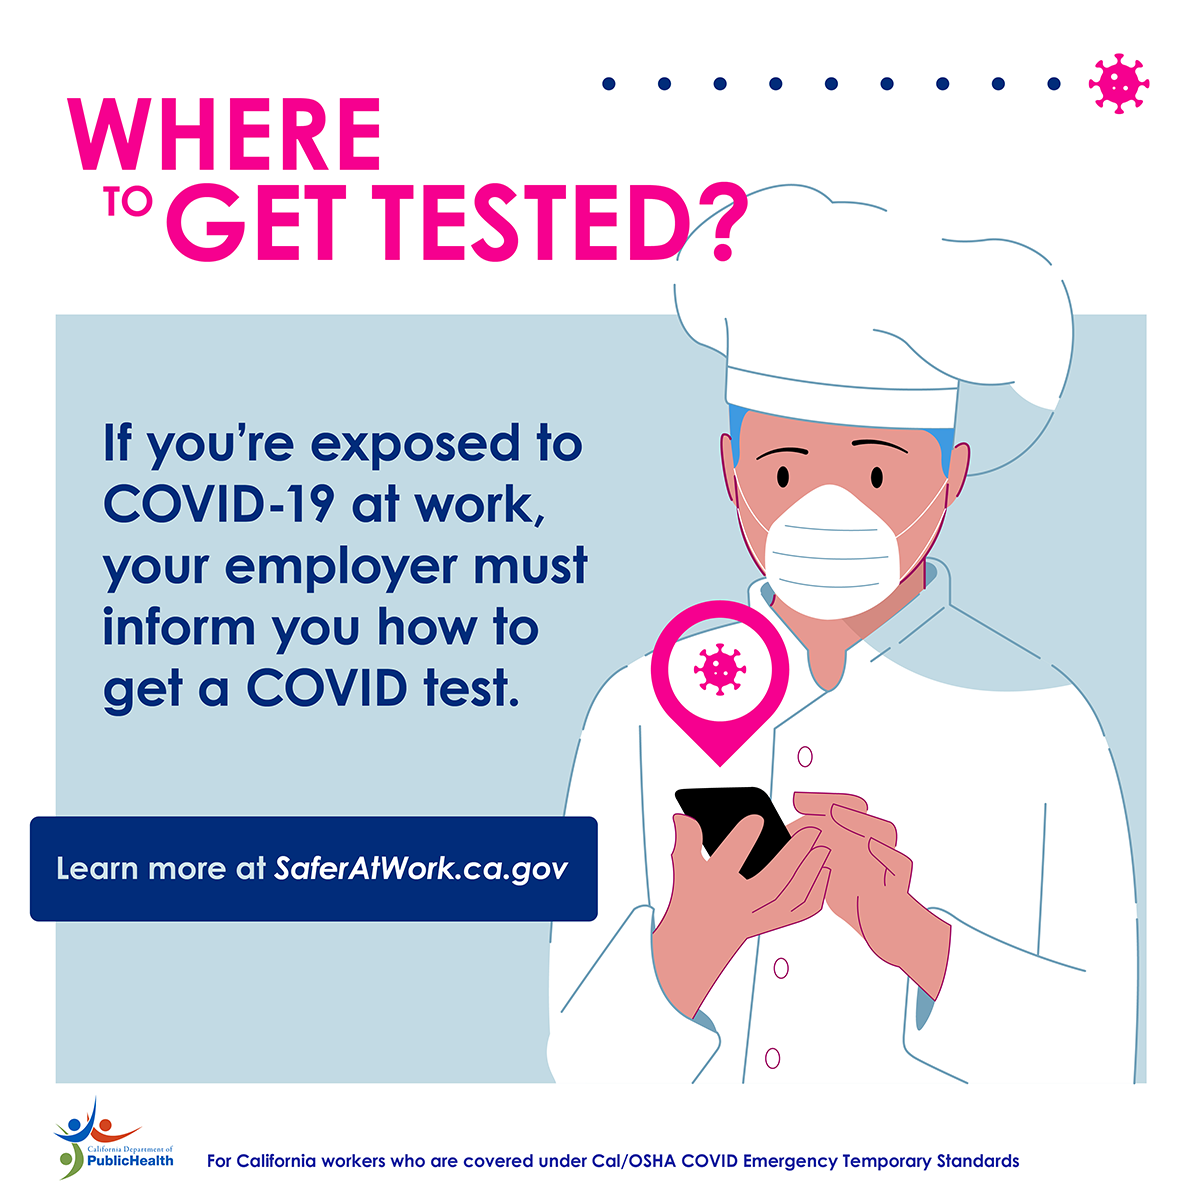 If you're exposed to COVID-19 at work, your employer must inform you how to get a COVID test.